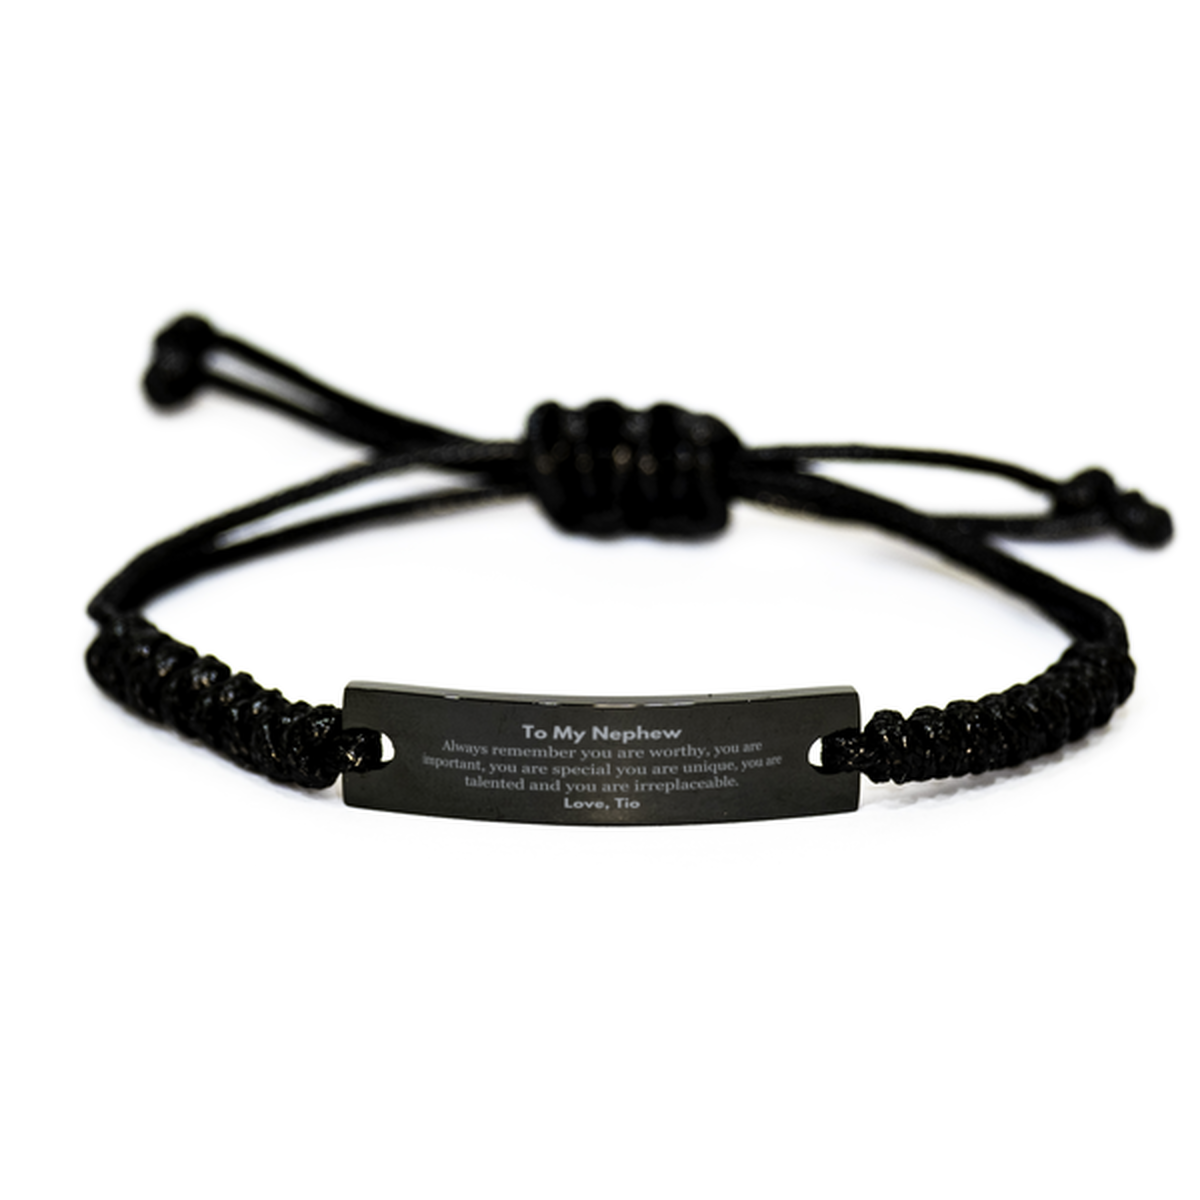 Nephew Birthday Gifts from Tio, Inspirational Black Rope Bracelet for Nephew Christmas Graduation Gifts for Nephew Always remember you are worthy, you are important. Love, Tio